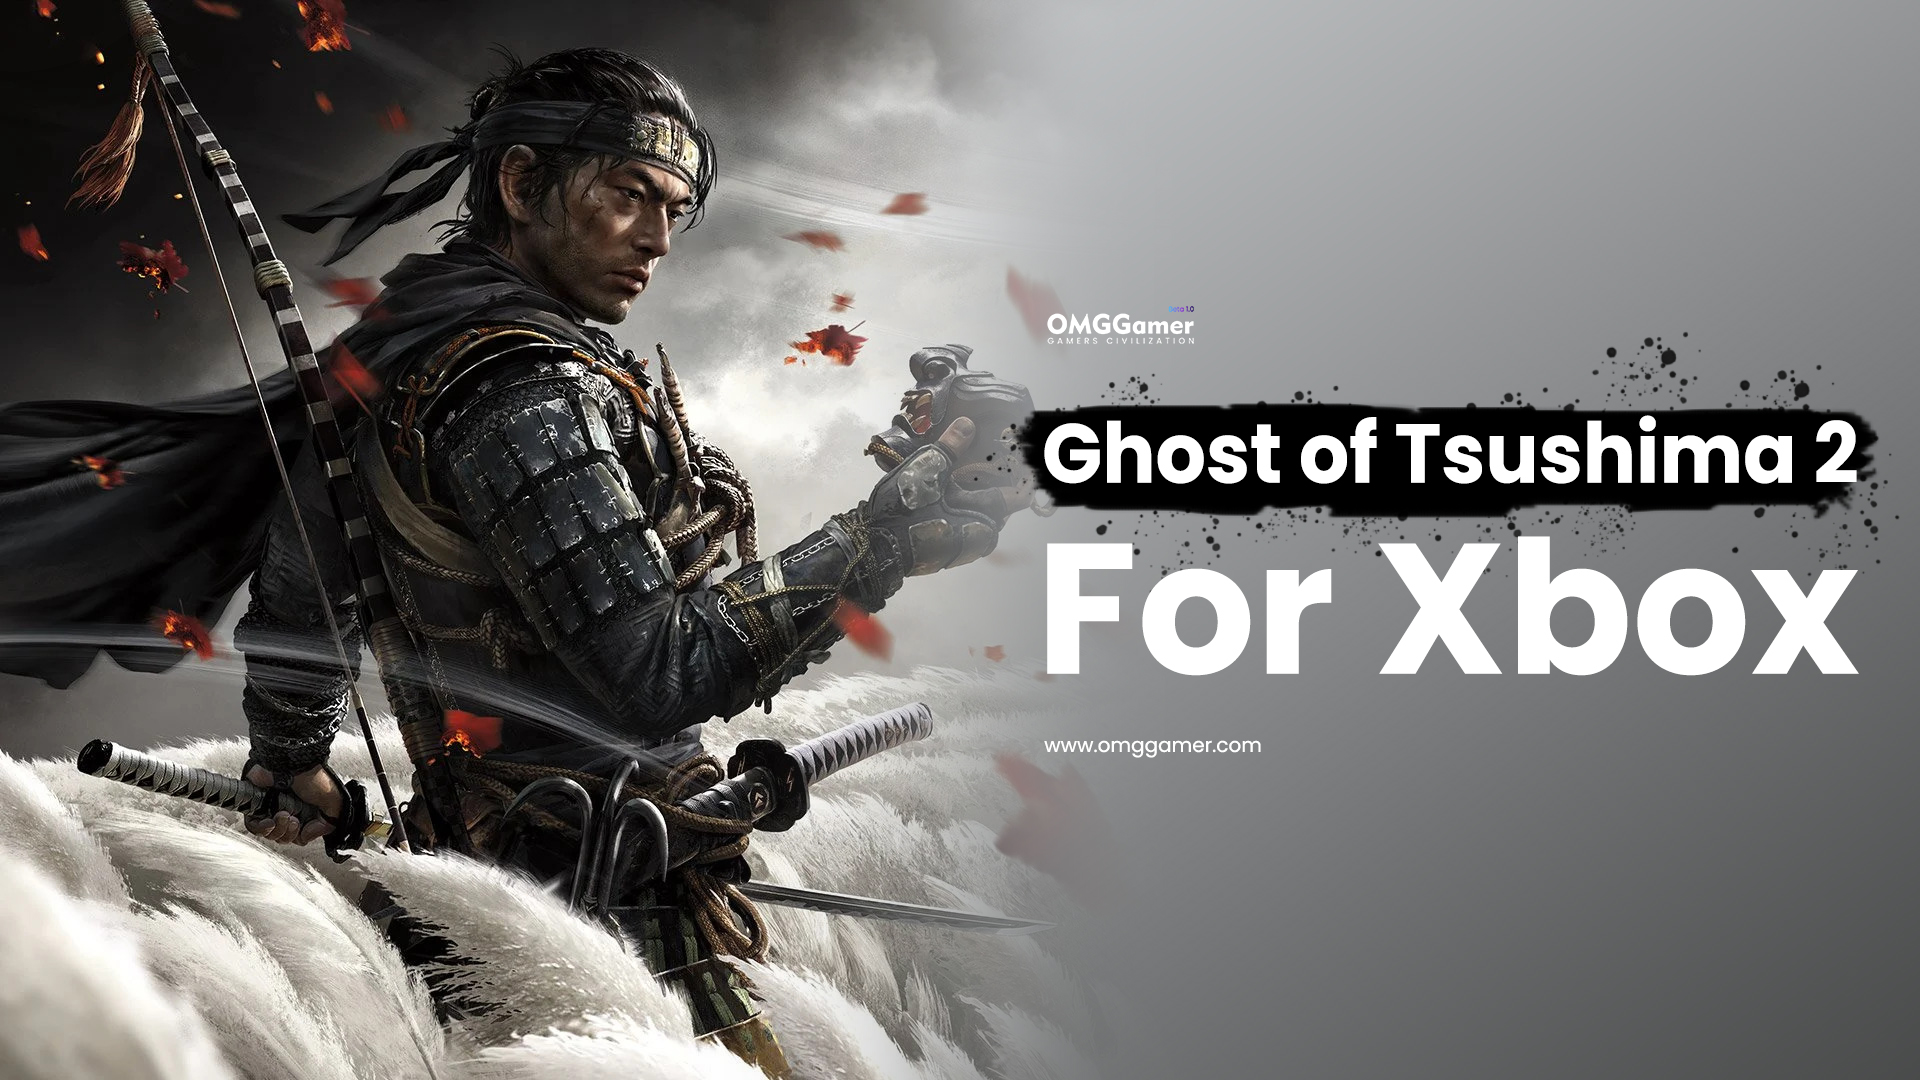 Ghost of Tsushima 2 for Xbox